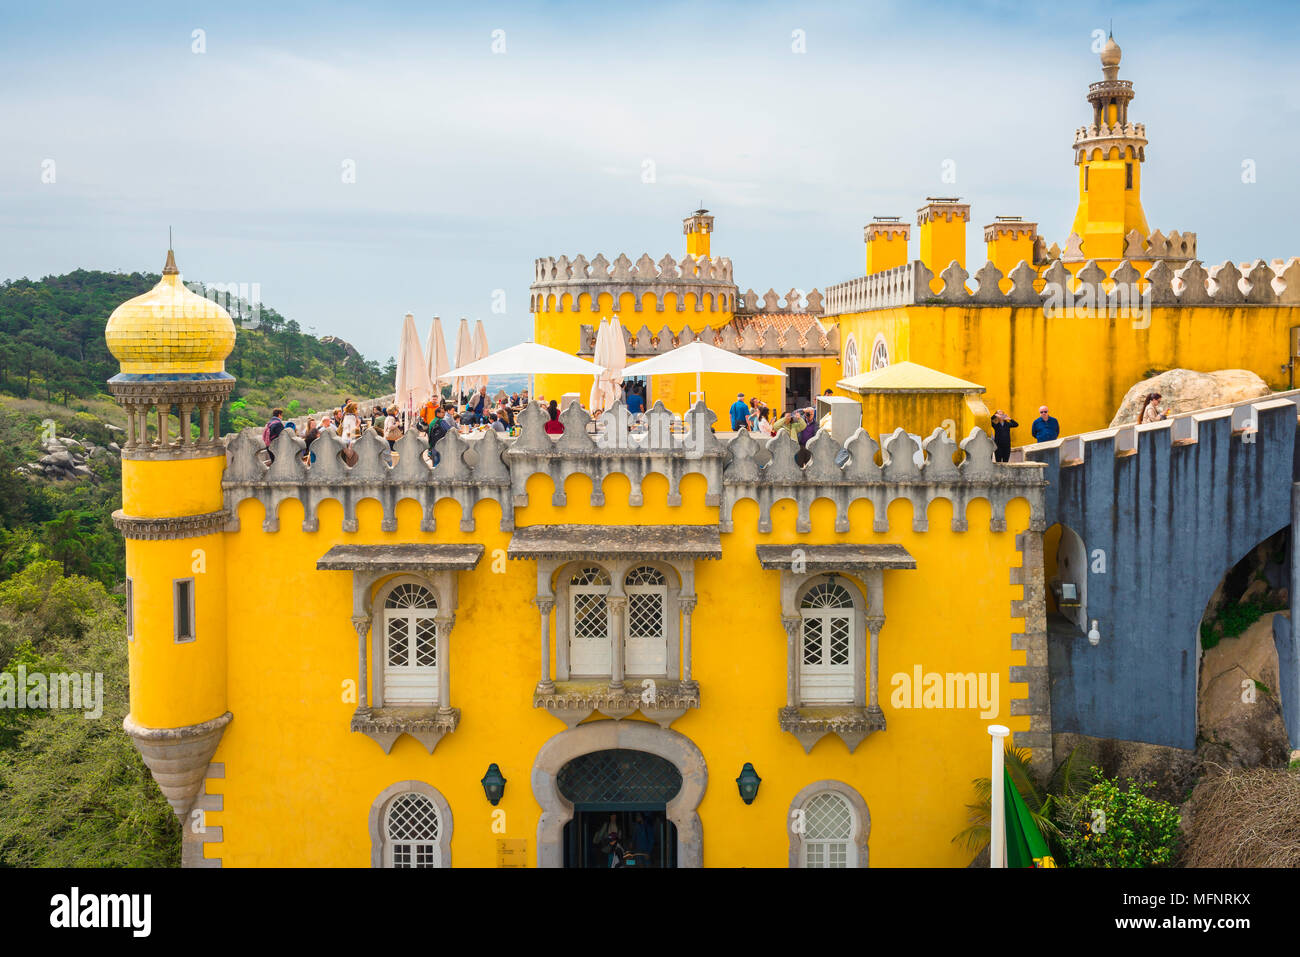 https://c8.alamy.com/comp/MFNRKX/palacio-da-pena-sintra-view-of-people-relaxing-on-a-cafe-terrace-sited-on-the-roof-of-the-colorful-palacio-da-pena-in-sintra-portugal-MFNRKX.jpg